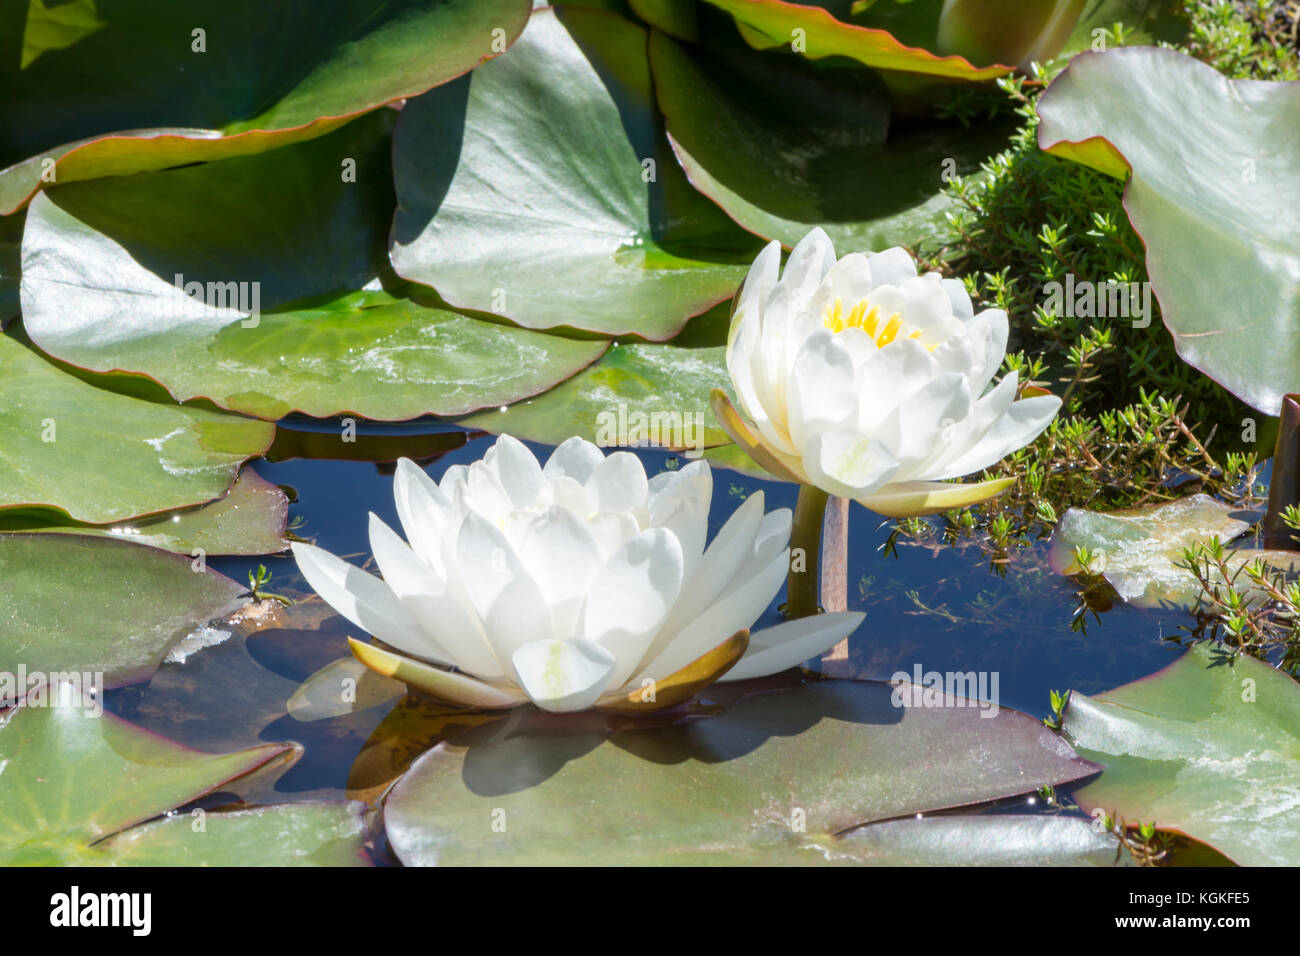 Two White Nymphaea 'Caroliniana Nivea' Waterlilies growing in the natural setting of a pond and surrounded with lily pads. Stock Photo